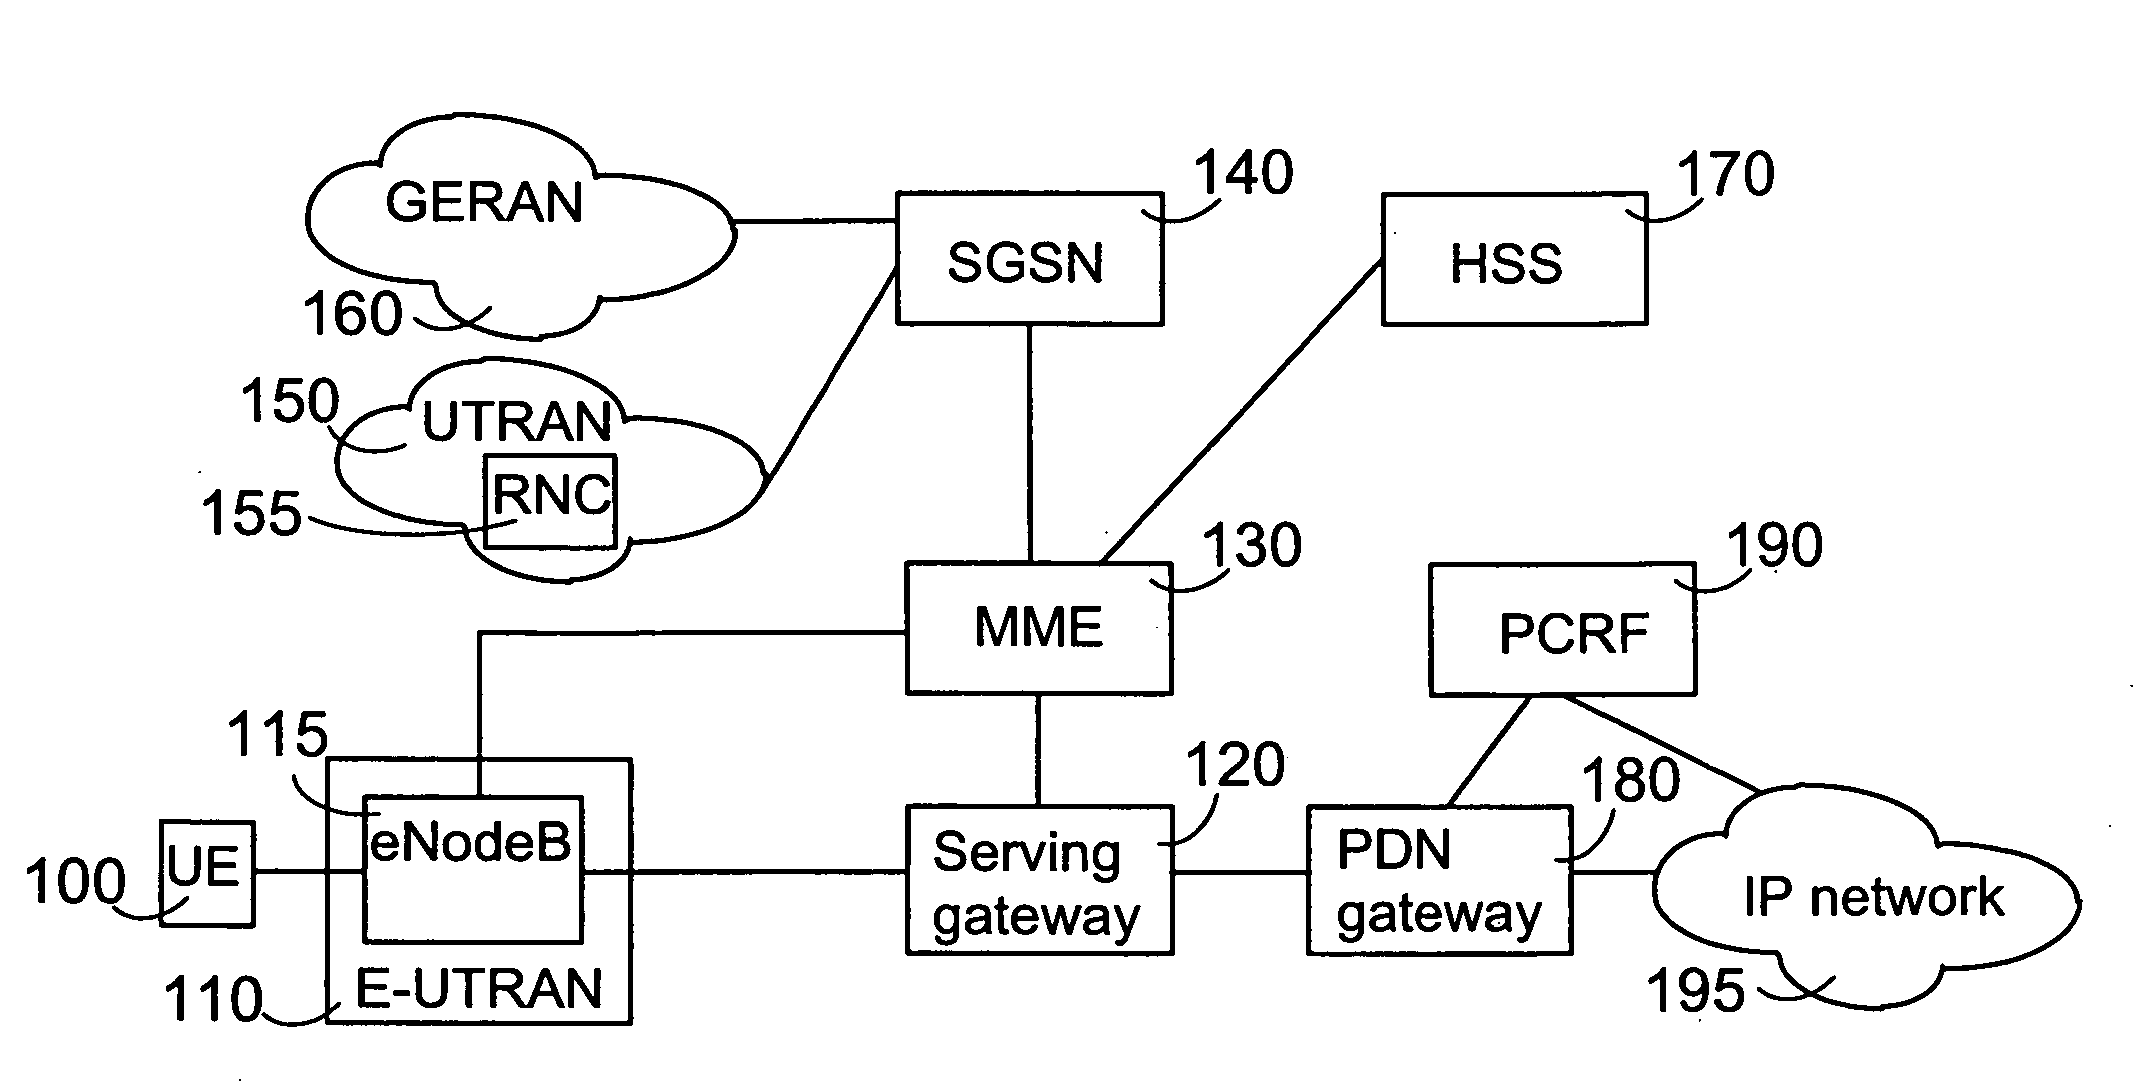 Mobility related control signalling authentication in mobile communications system